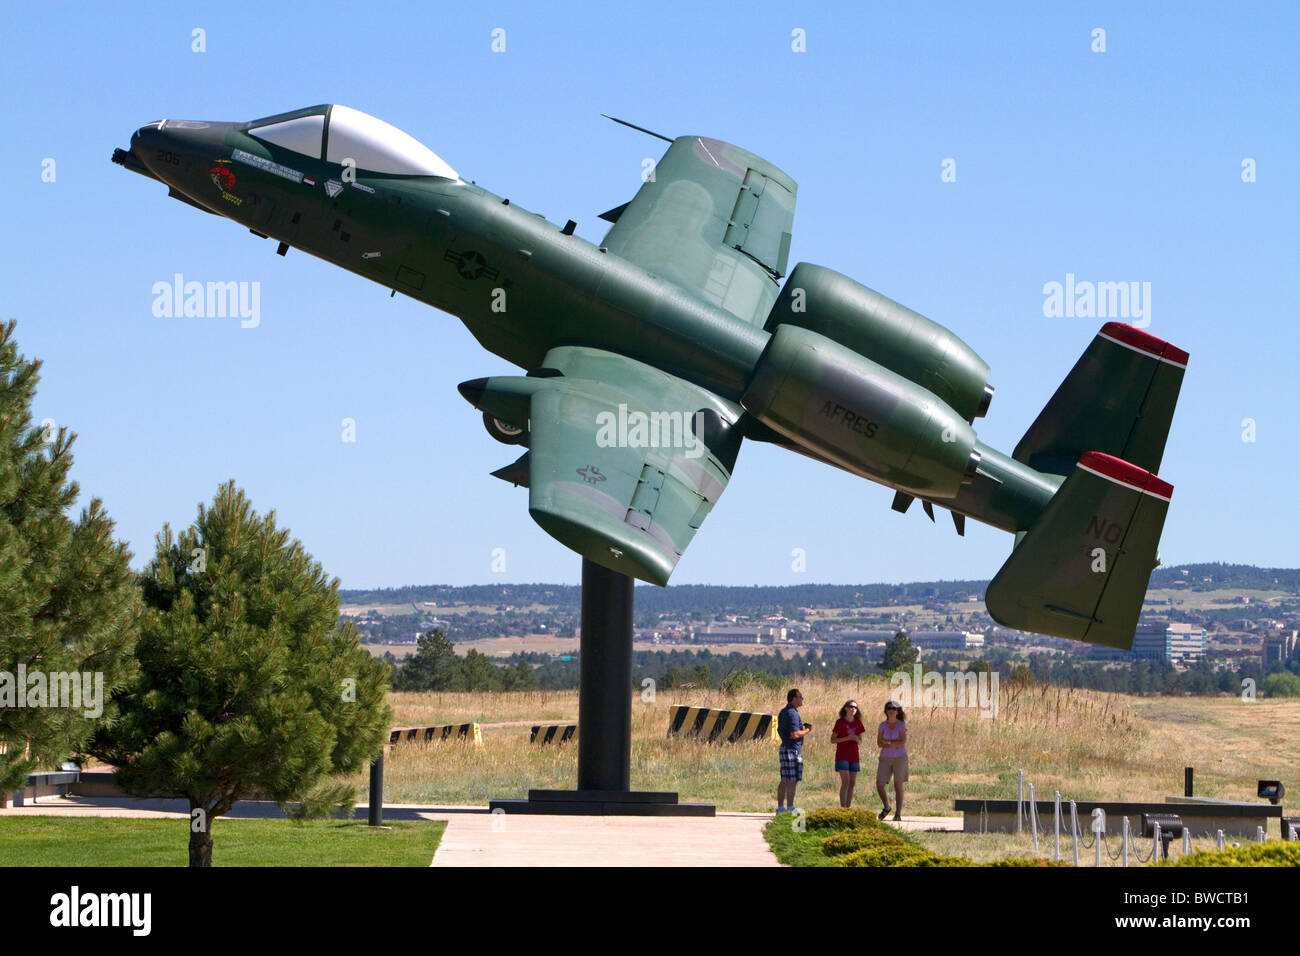 A-10 Thunderbolt II jet aircraft displayed at the Air Force Academy in Colorado Springs, Colorado, USA. Stock Photo